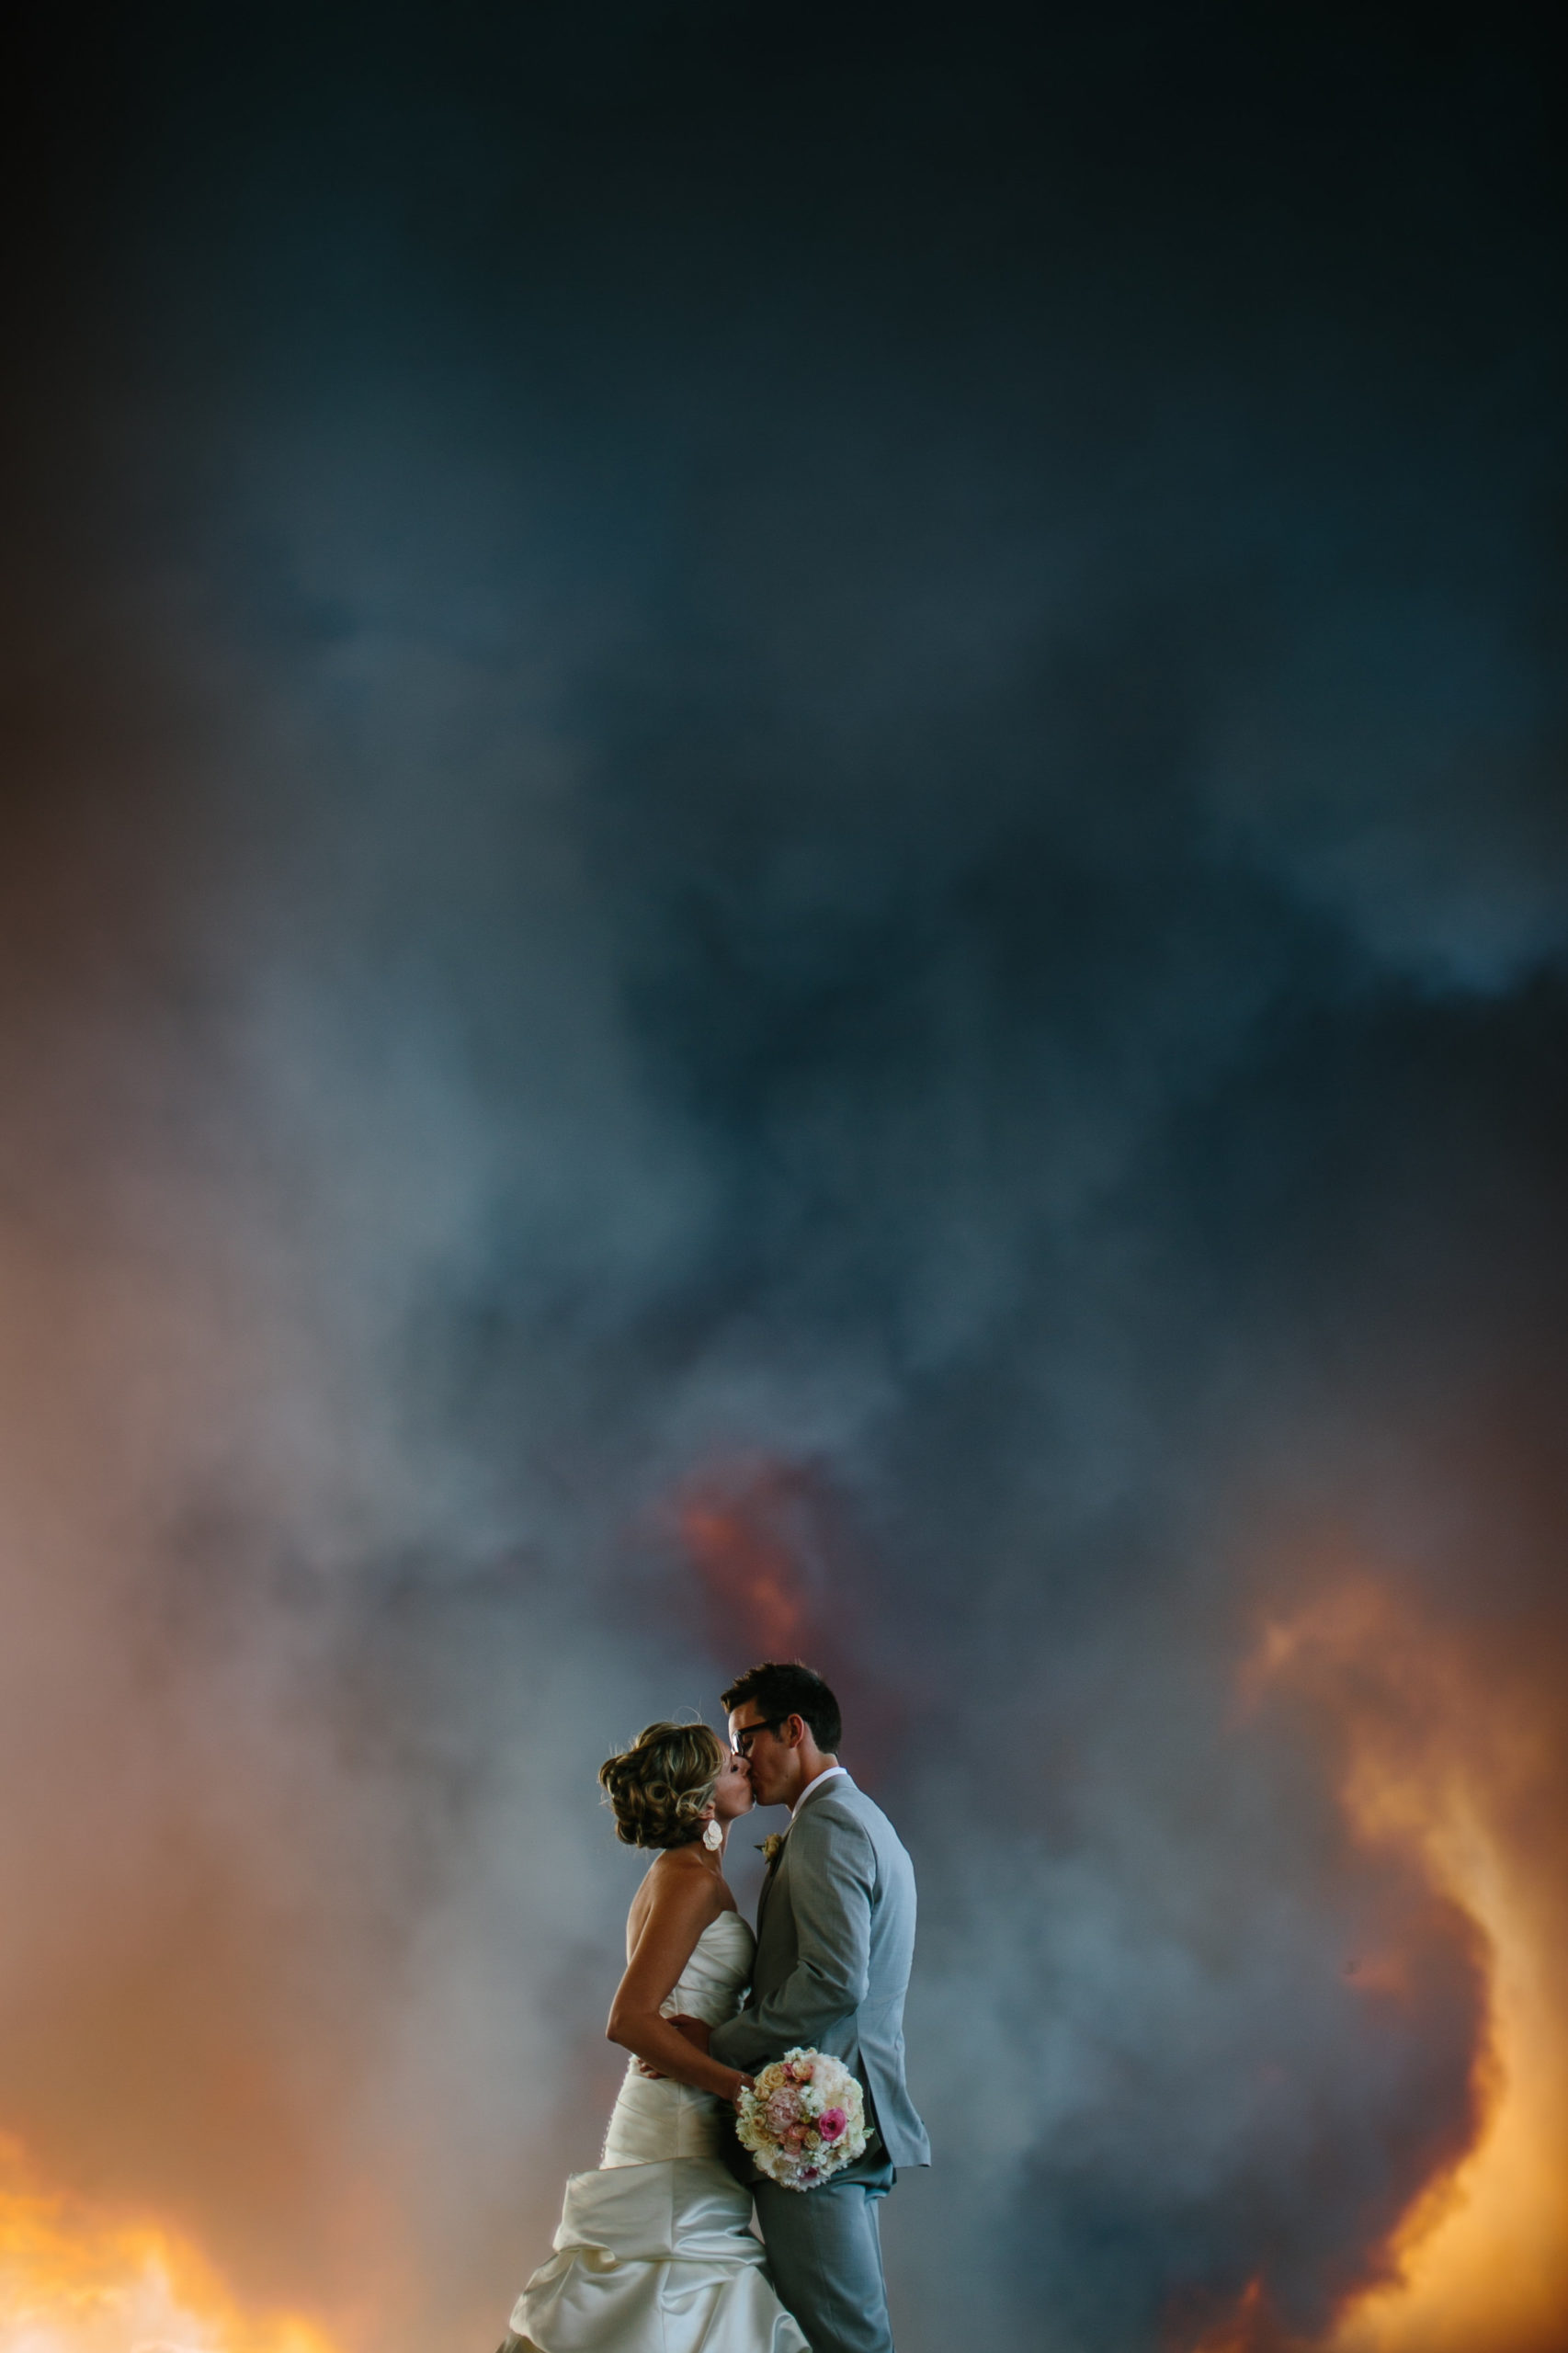 How This Couple Ended Up With The Most Dramatic Wedding Pictures Ever